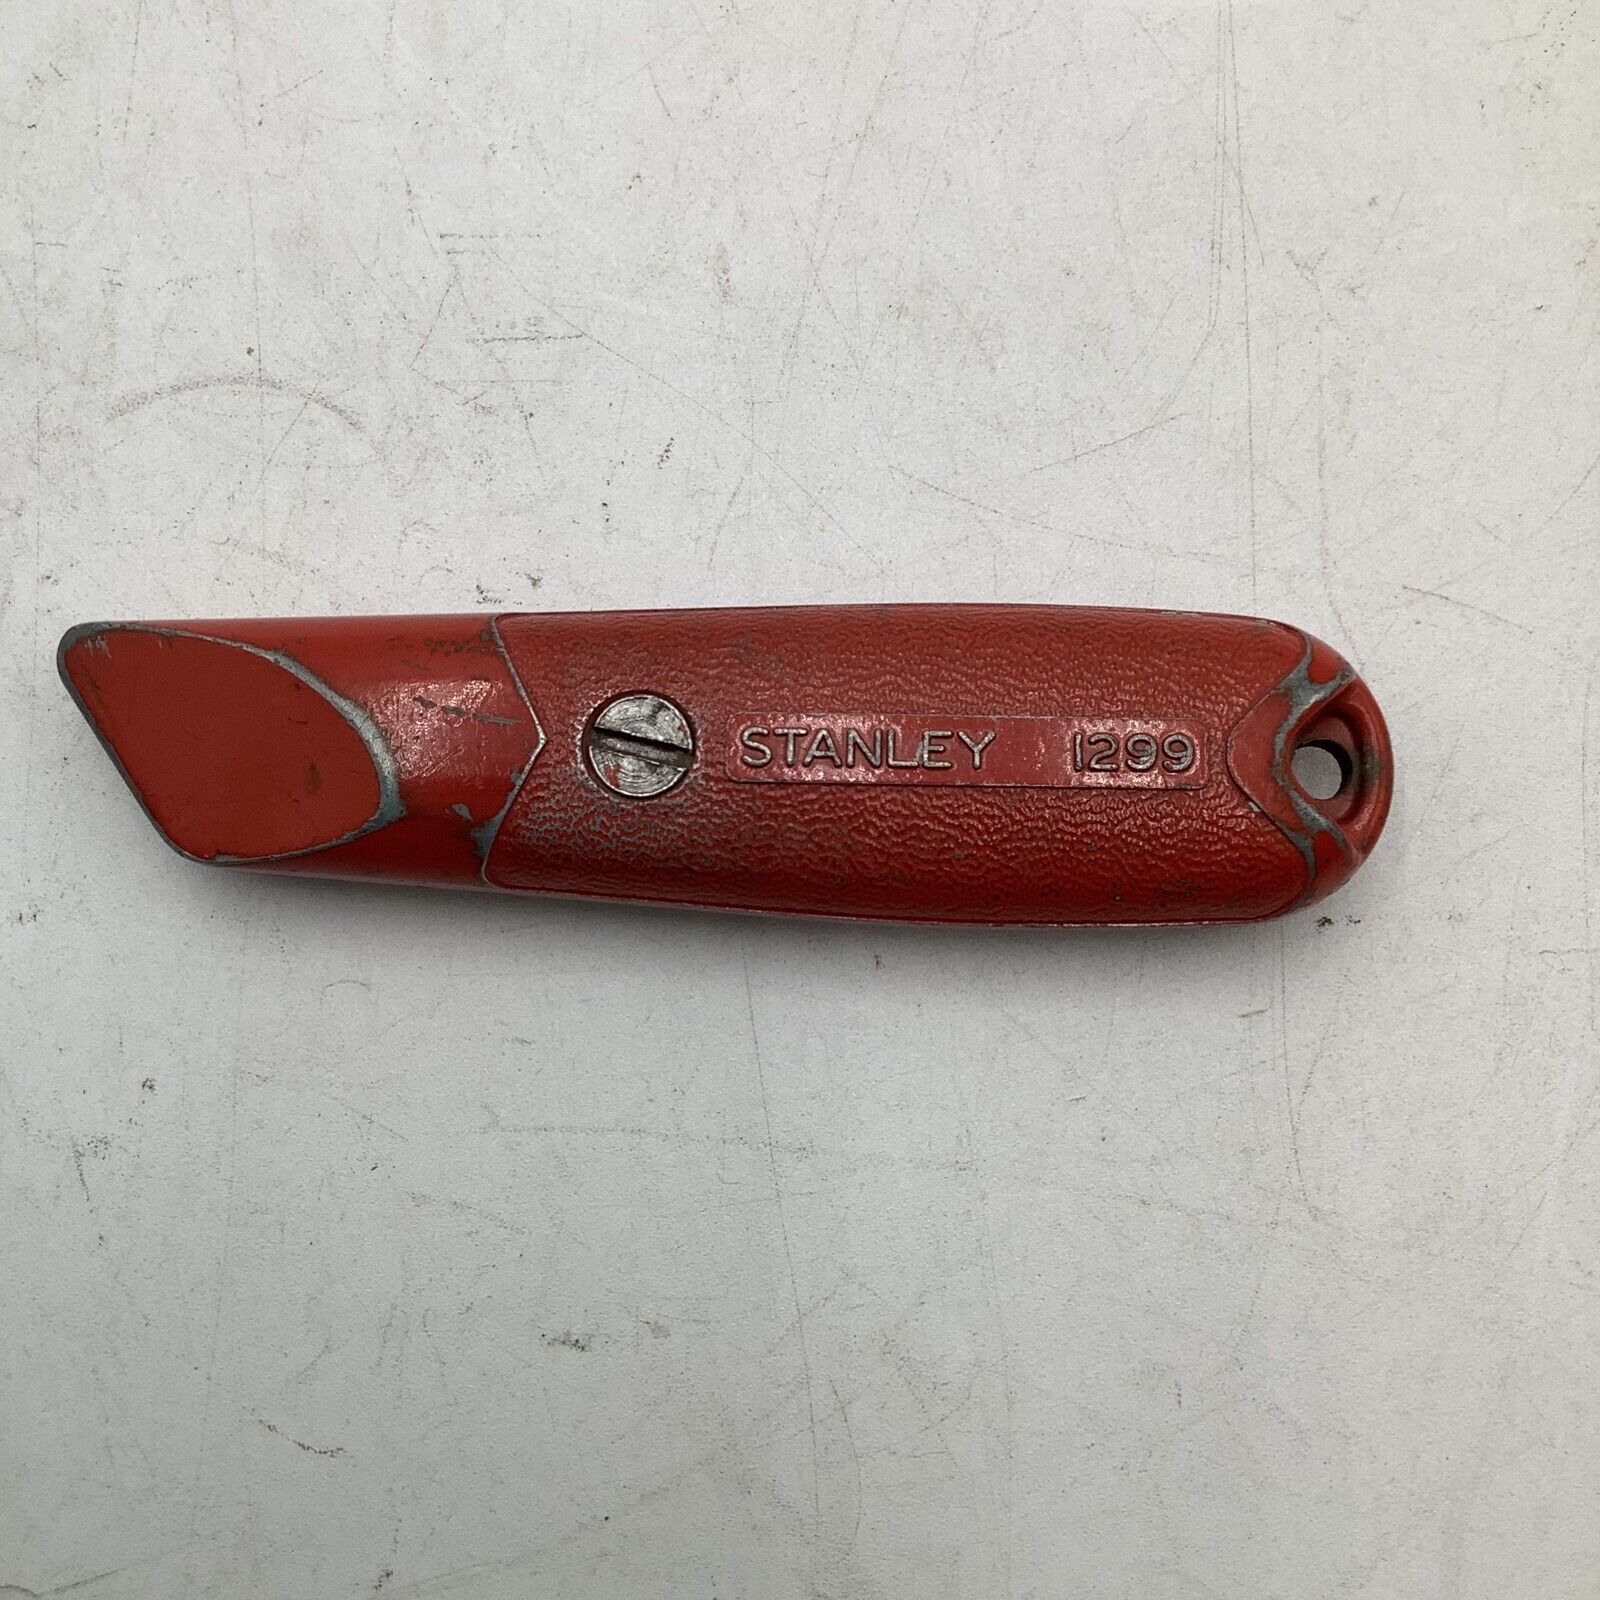 Vintage Stanley 1299 Utility Knife Red Box Knife Collectible Tool 1930s